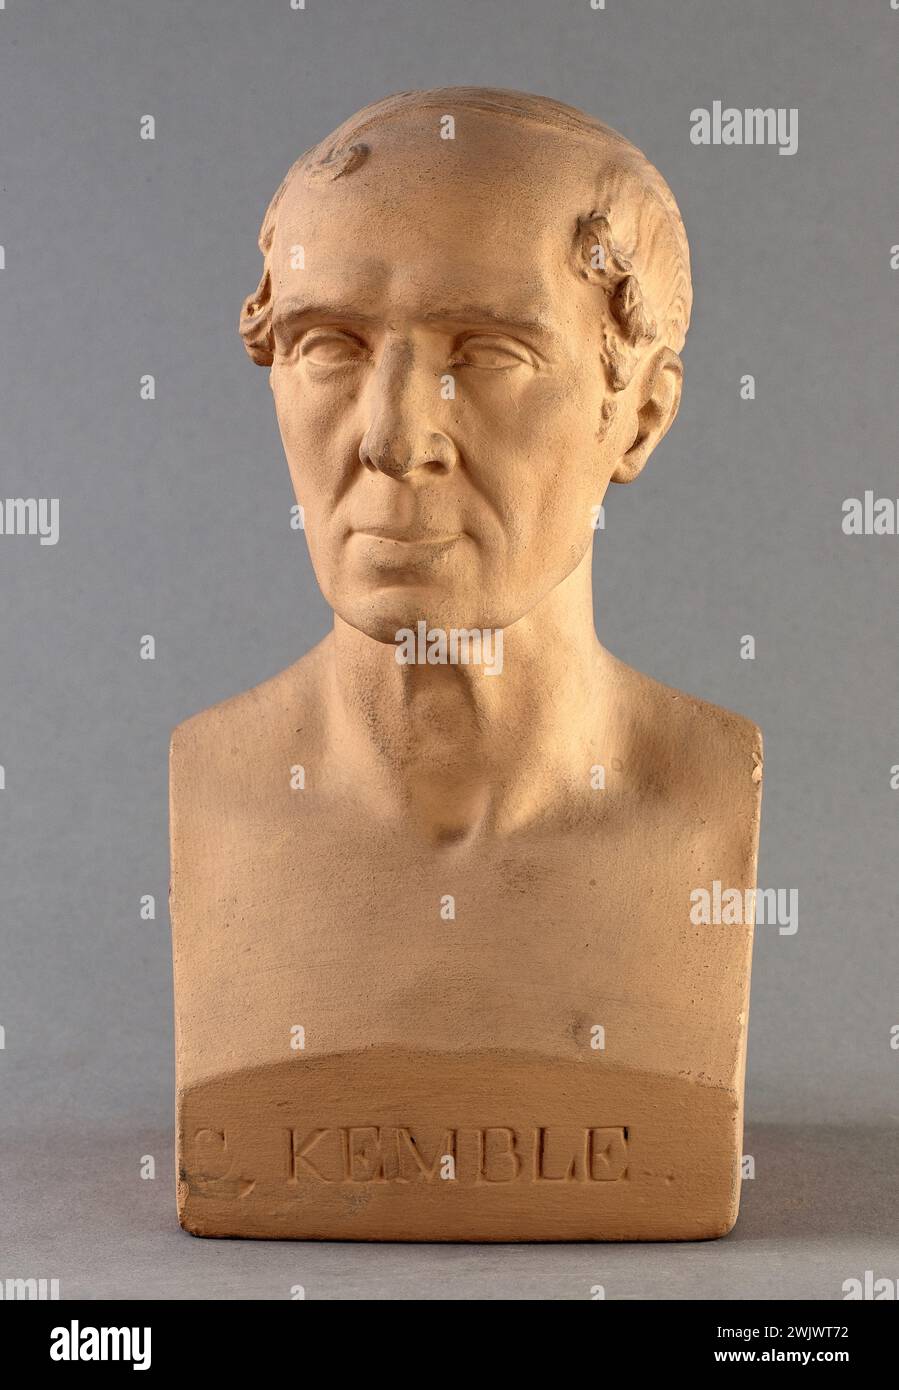 Jean-Pierre Dantan (1800-1869), said Dantan the young. Serious portrait of the English actor, Charles Kemble (1775-1854). Terracotta patinated plaster, round-bump. 1842. Paris, Carnavalet museum. English actor, bust, patterned patina, man portrait, terracotta Stock Photo